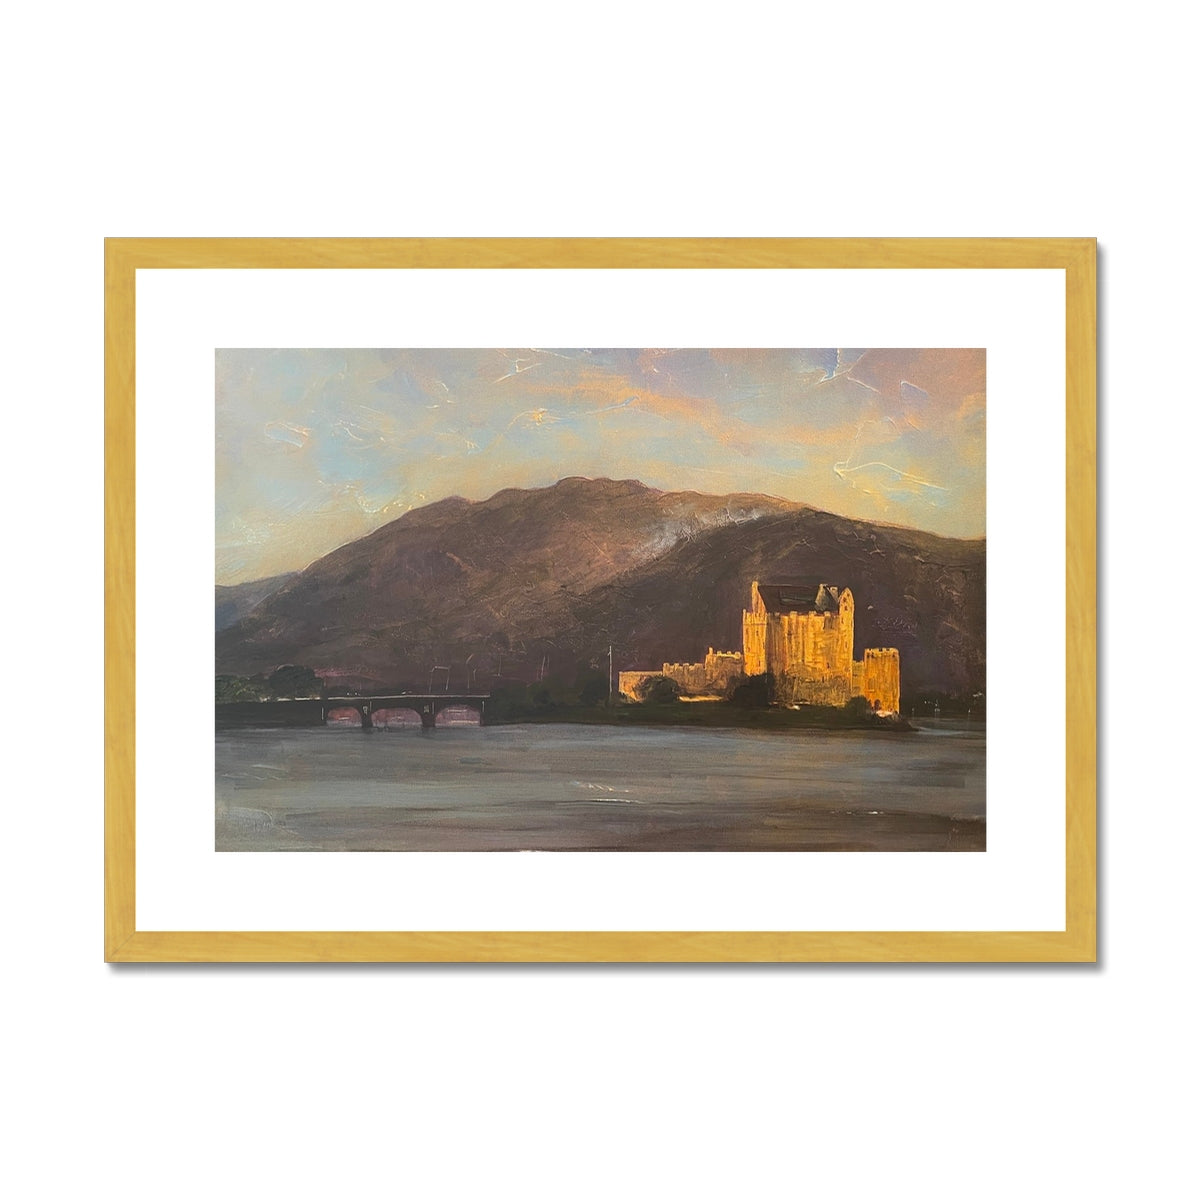 Eilean Donan Castle Painting | Antique Framed & Mounted Prints From Scotland-Antique Framed & Mounted Prints-Historic & Iconic Scotland Art Gallery-A2 Landscape-Gold Frame-Paintings, Prints, Homeware, Art Gifts From Scotland By Scottish Artist Kevin Hunter